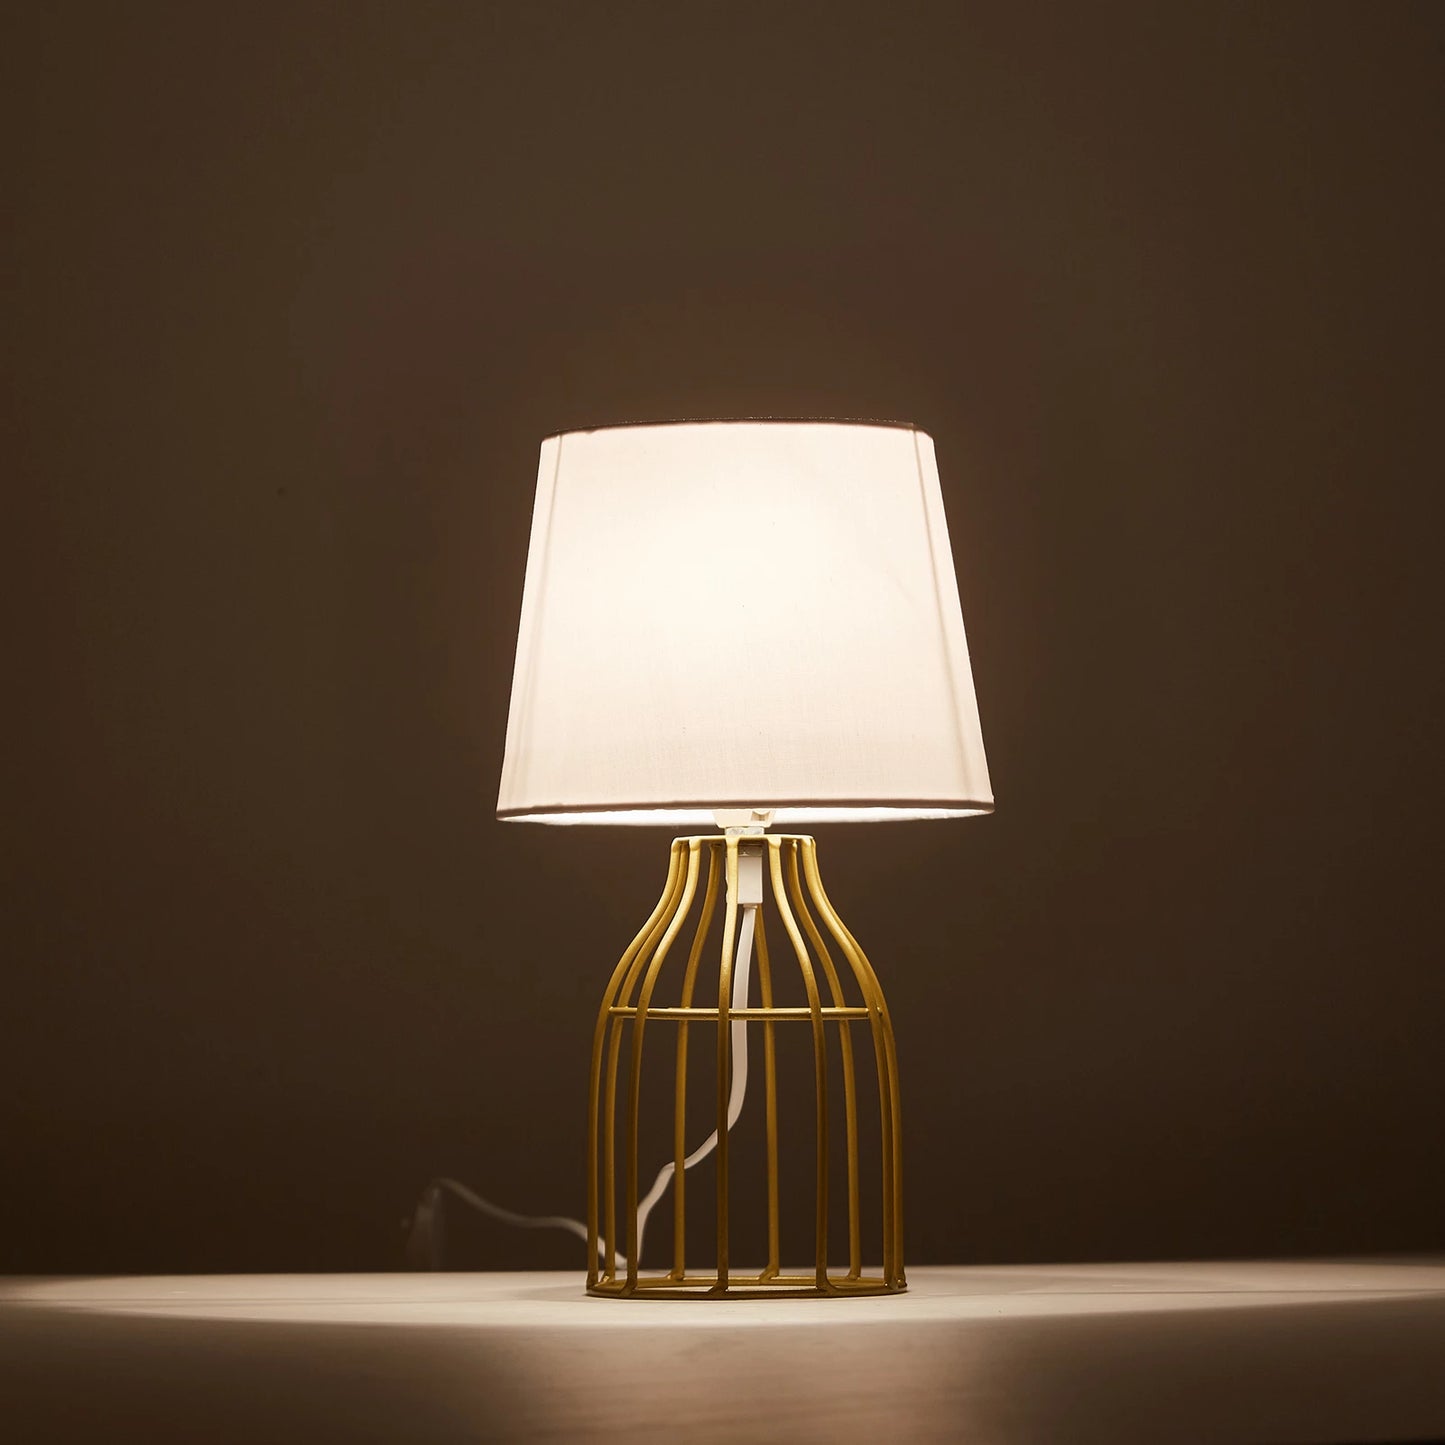 Modern Table Lamp with Geometric Metal Base & Fabric Shade 1 │ Desk Light Lamp for Bedroom Living Room